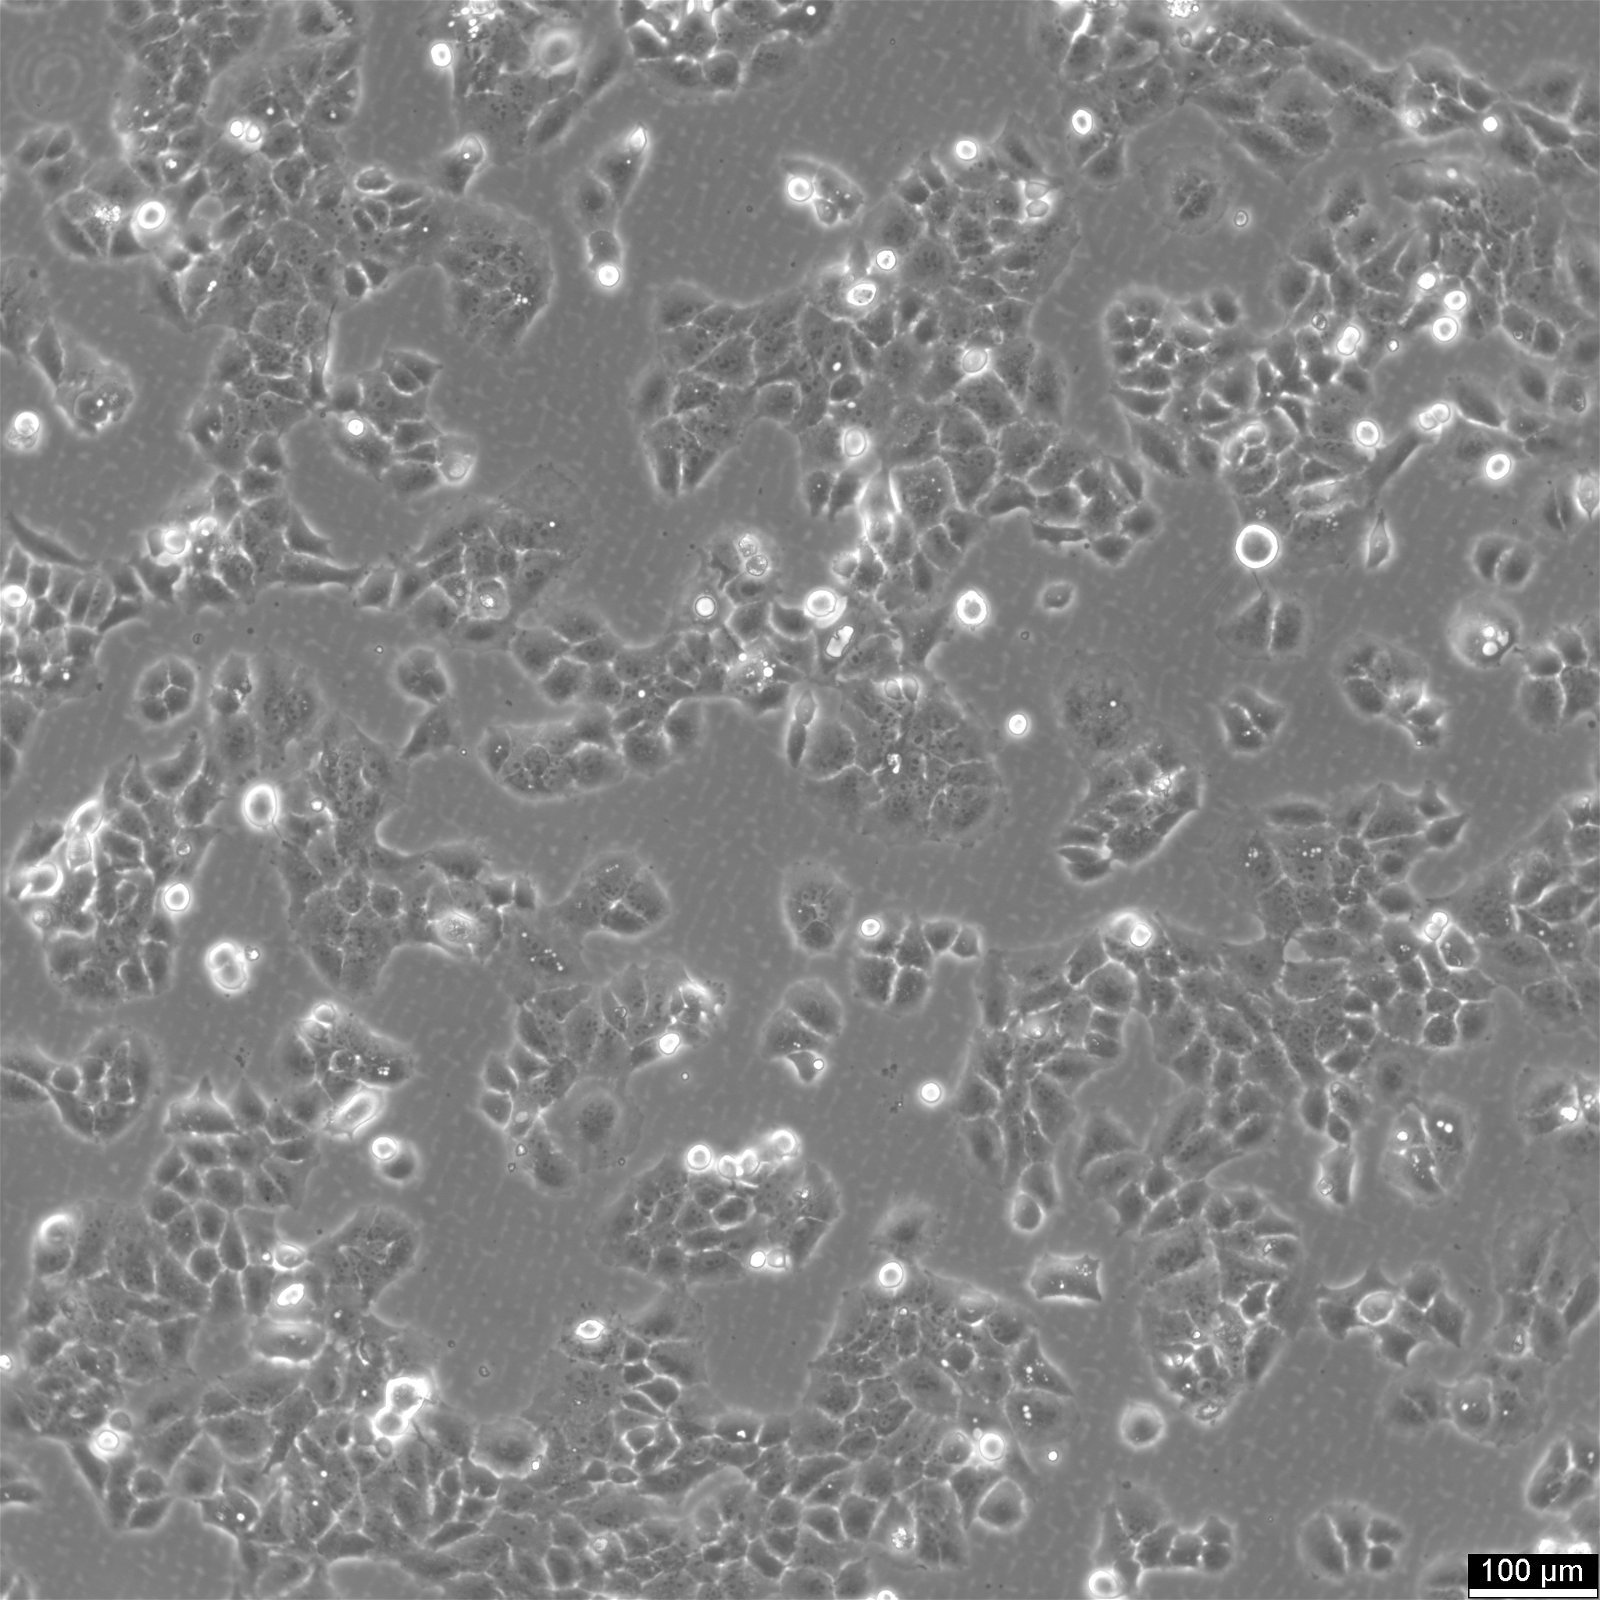 MS751 Cells